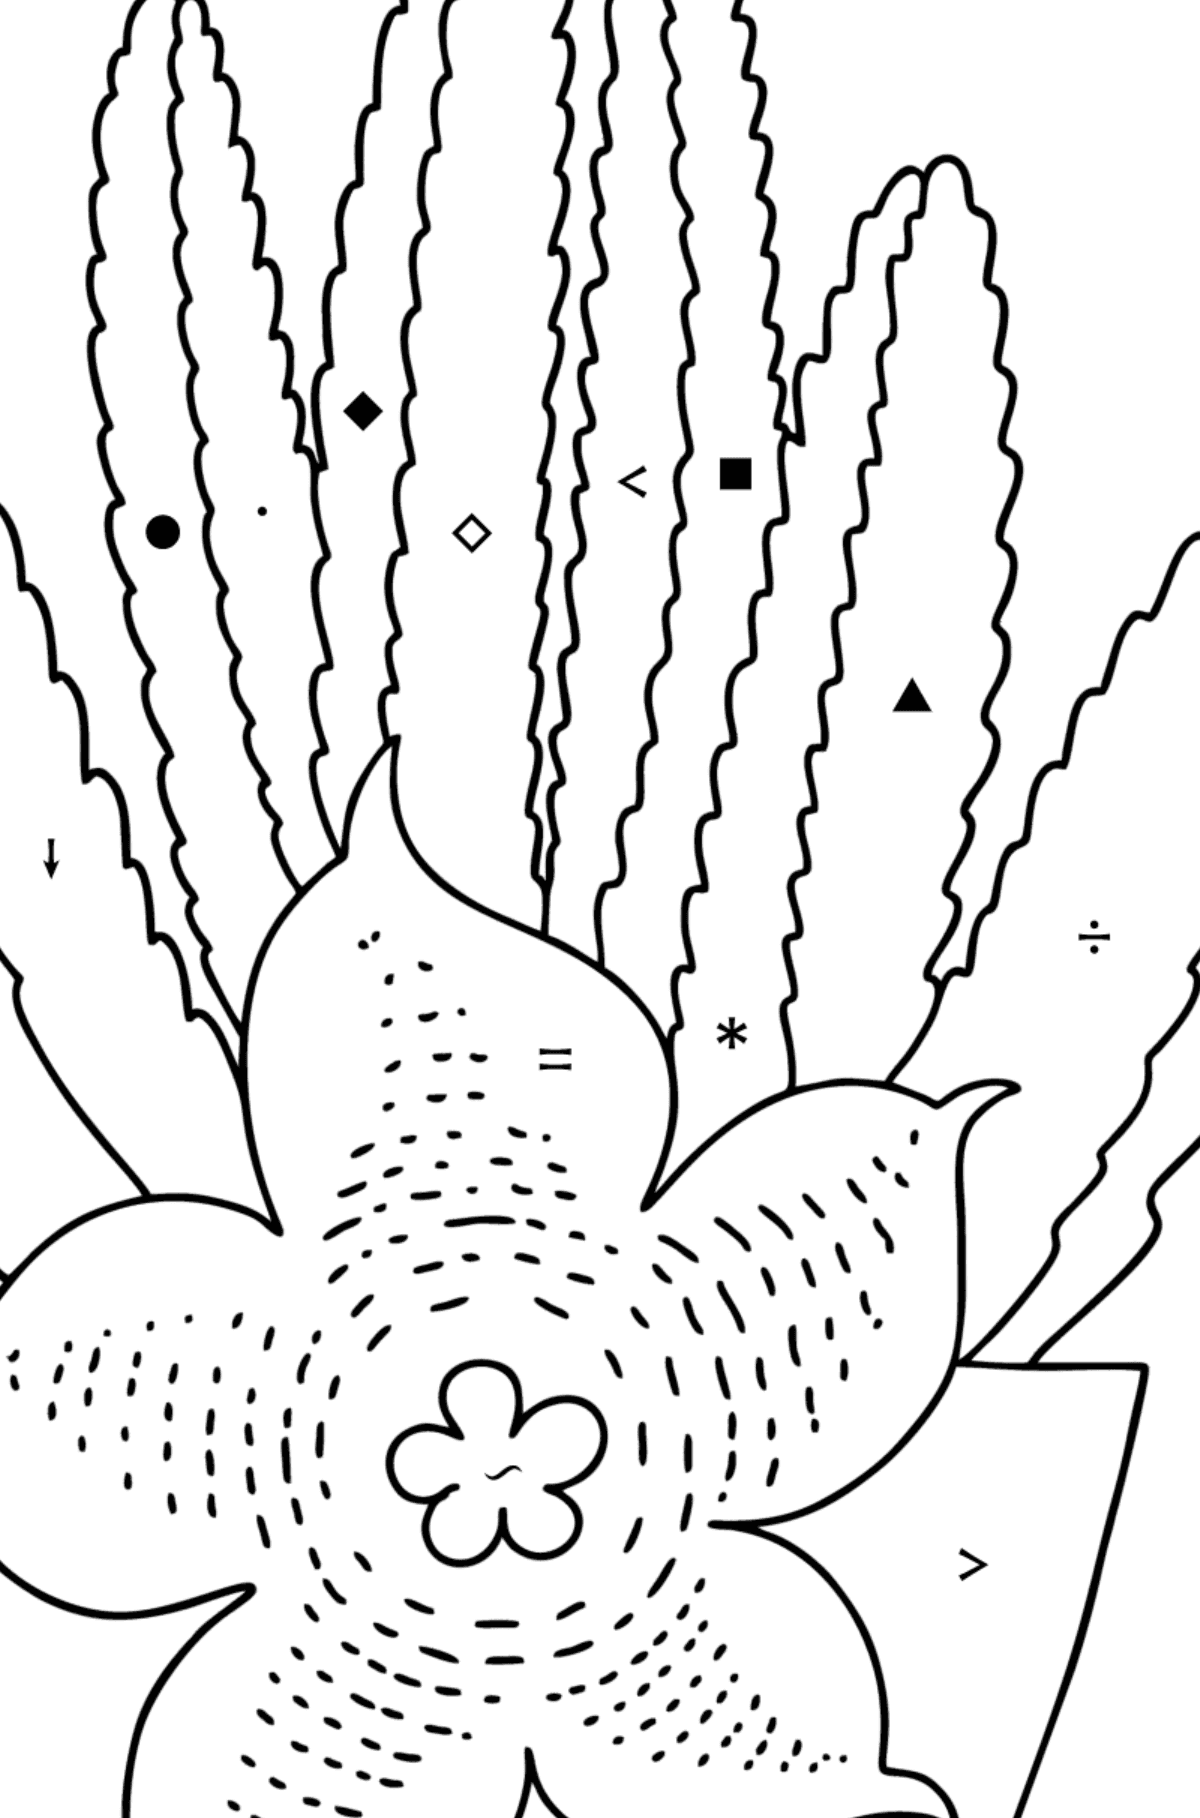 Stapelia Cactus coloring page - Coloring by Symbols for Kids